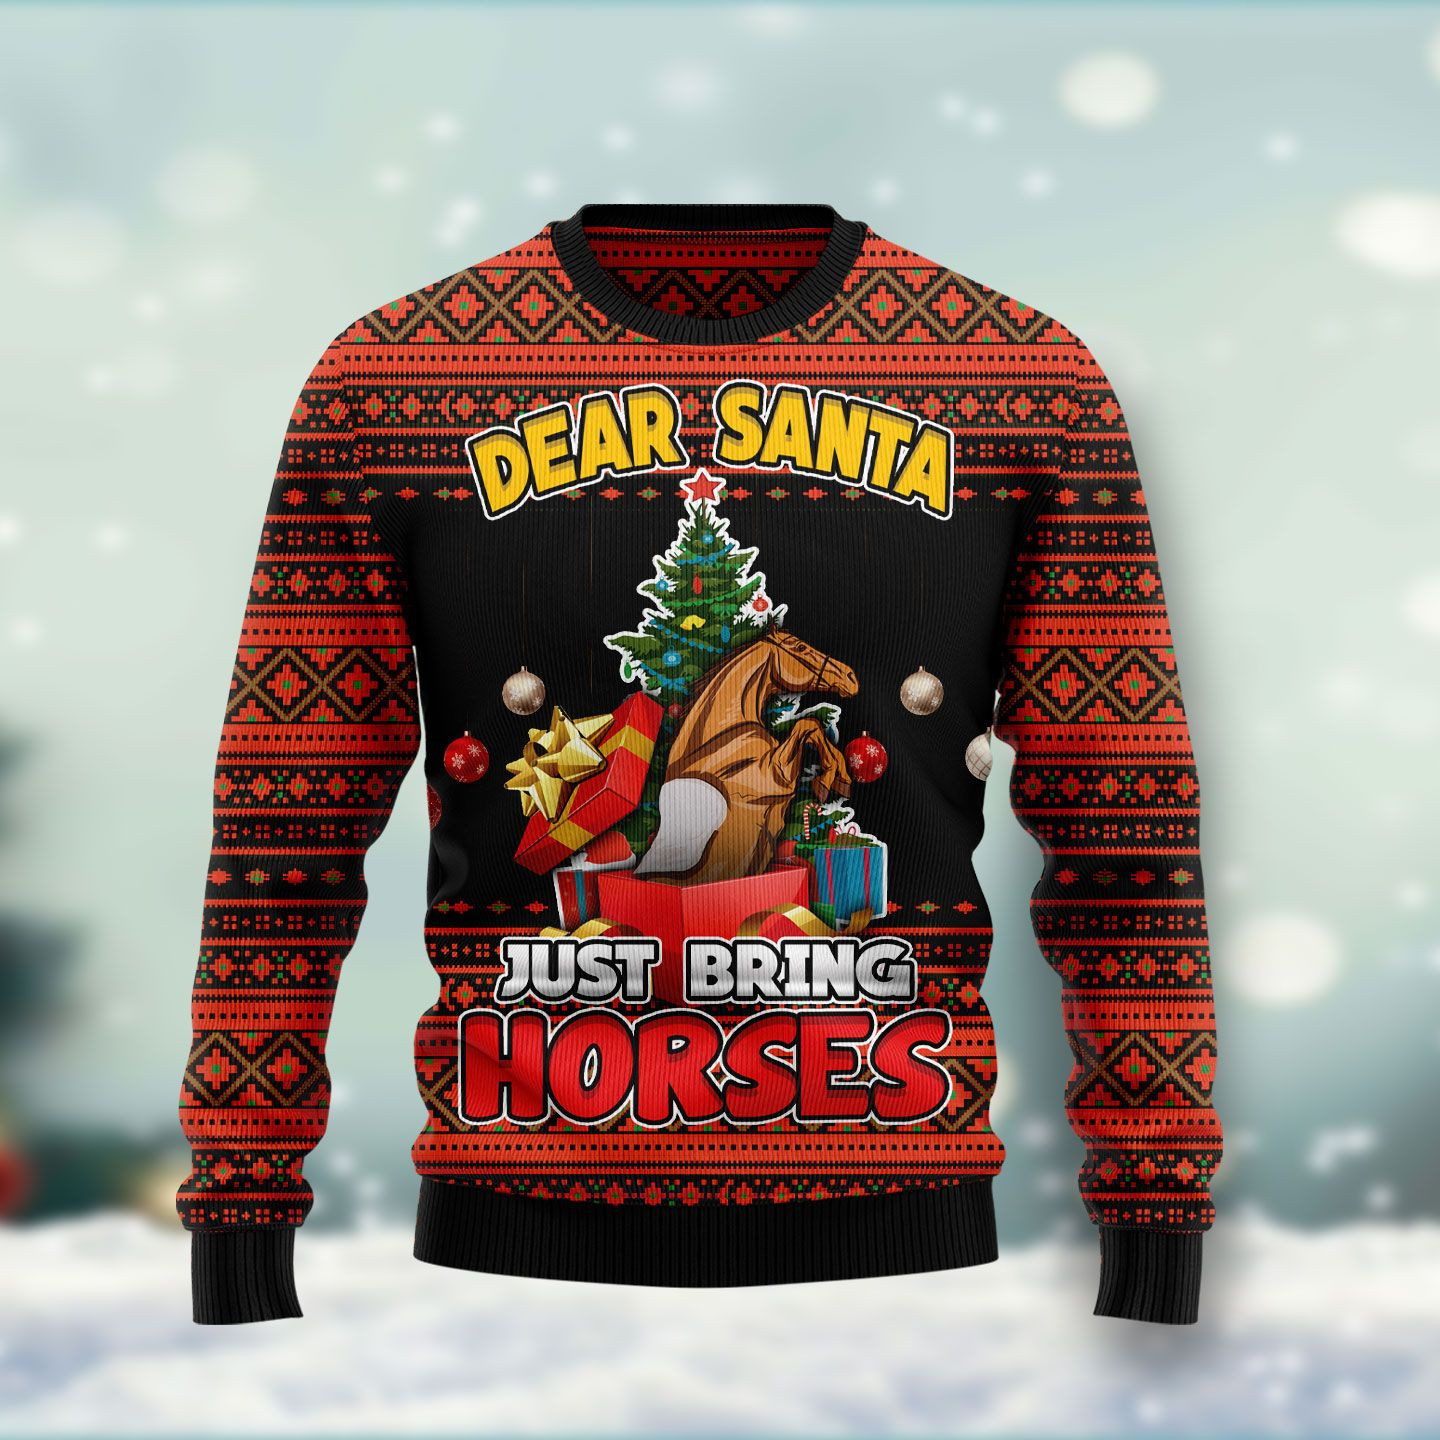 Dear Santa Just Bring Horses Ugly Christmas Sweater Ugly Sweater For Men Women